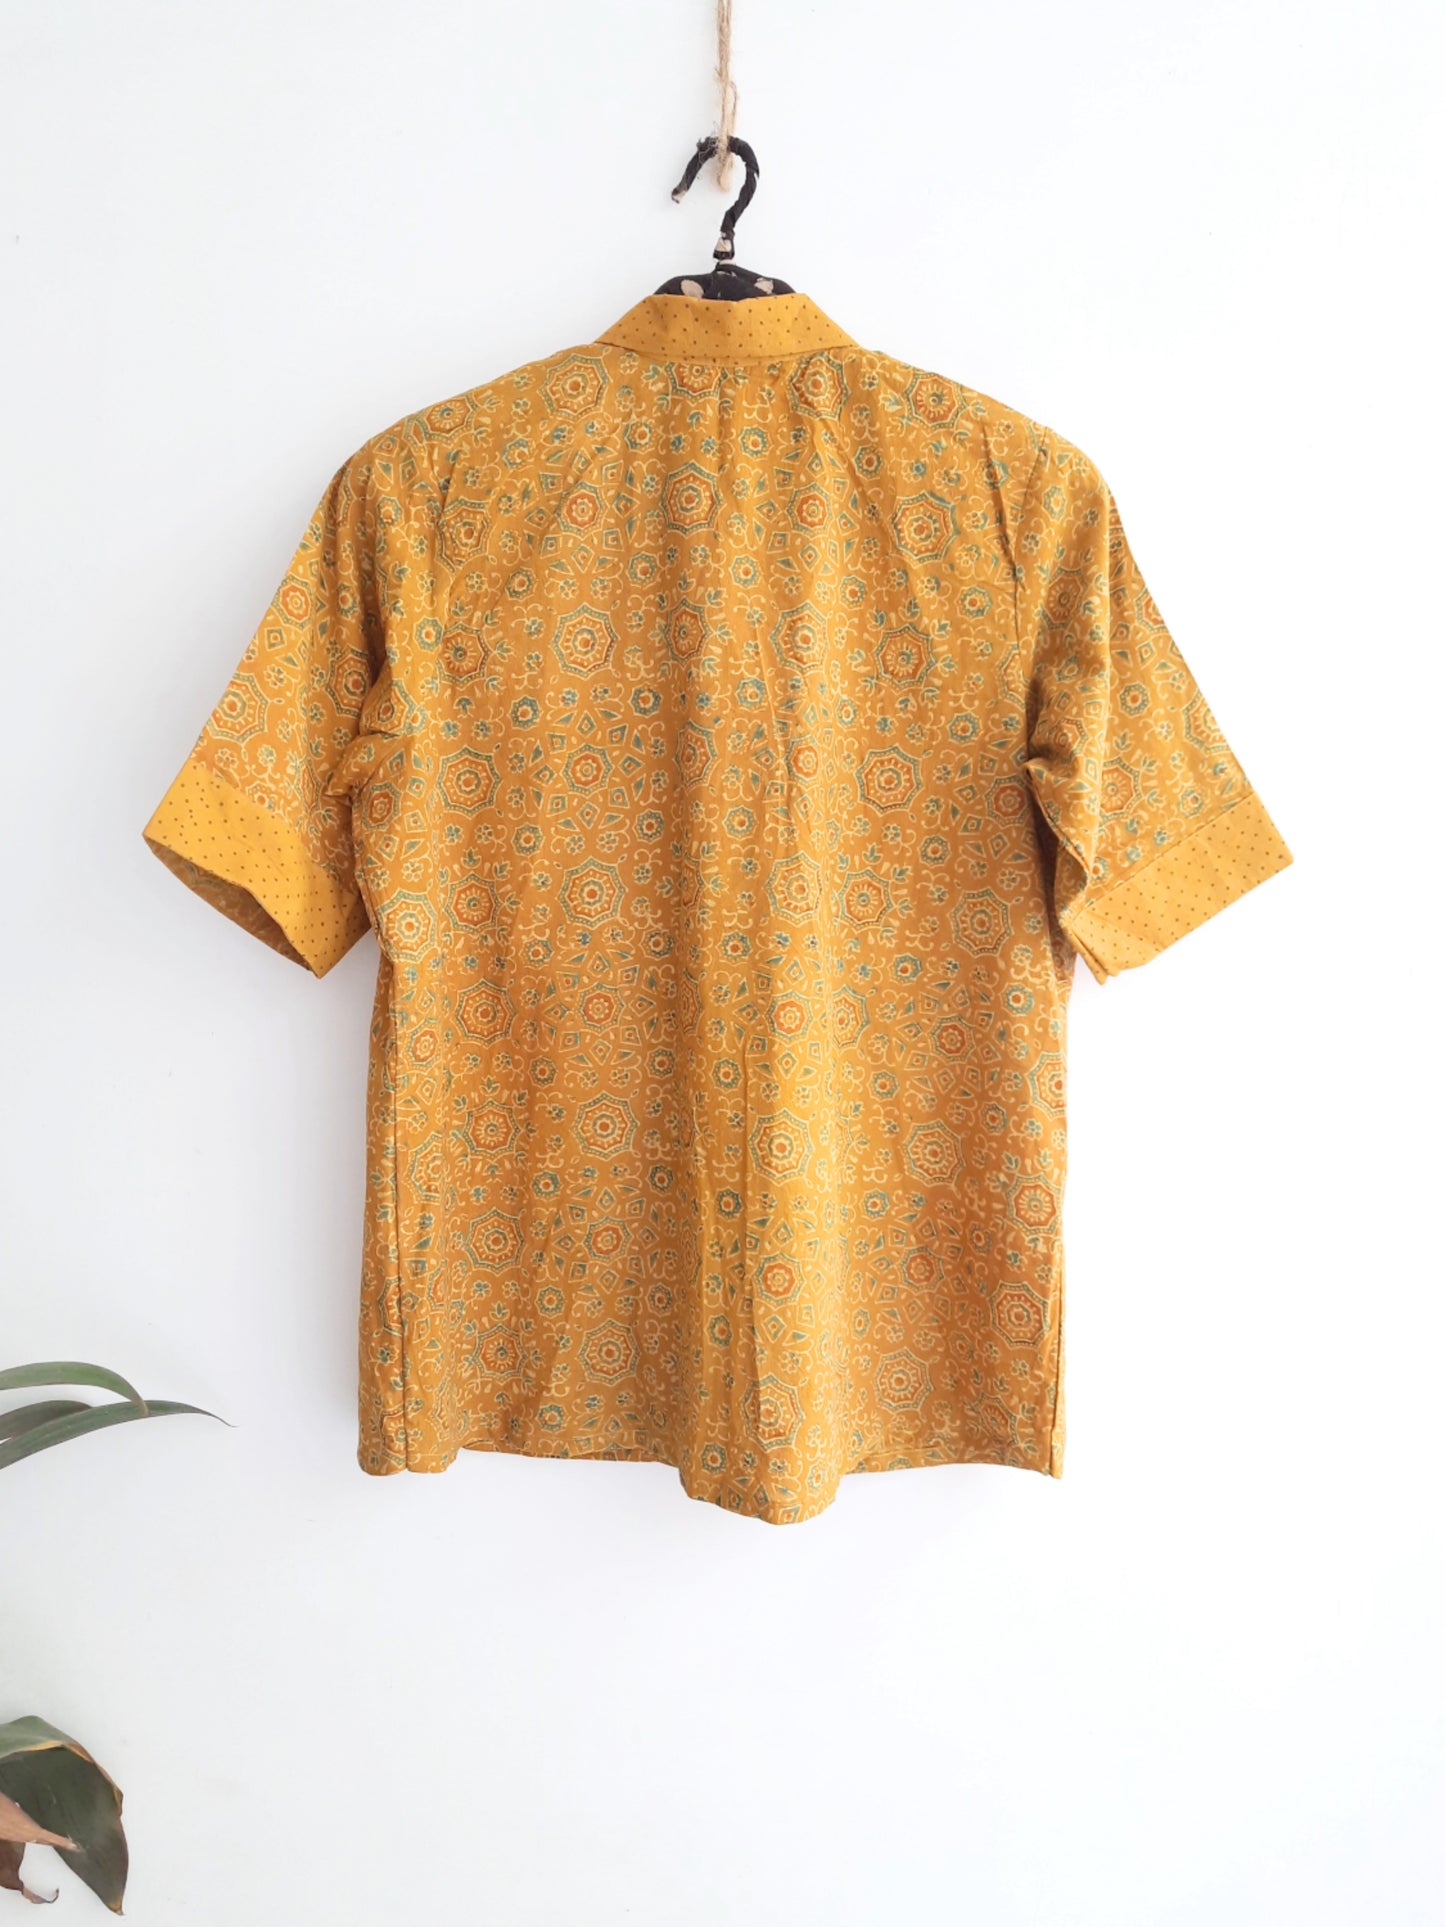 Turmeric dyed ajrakh prints cotton shirt for her